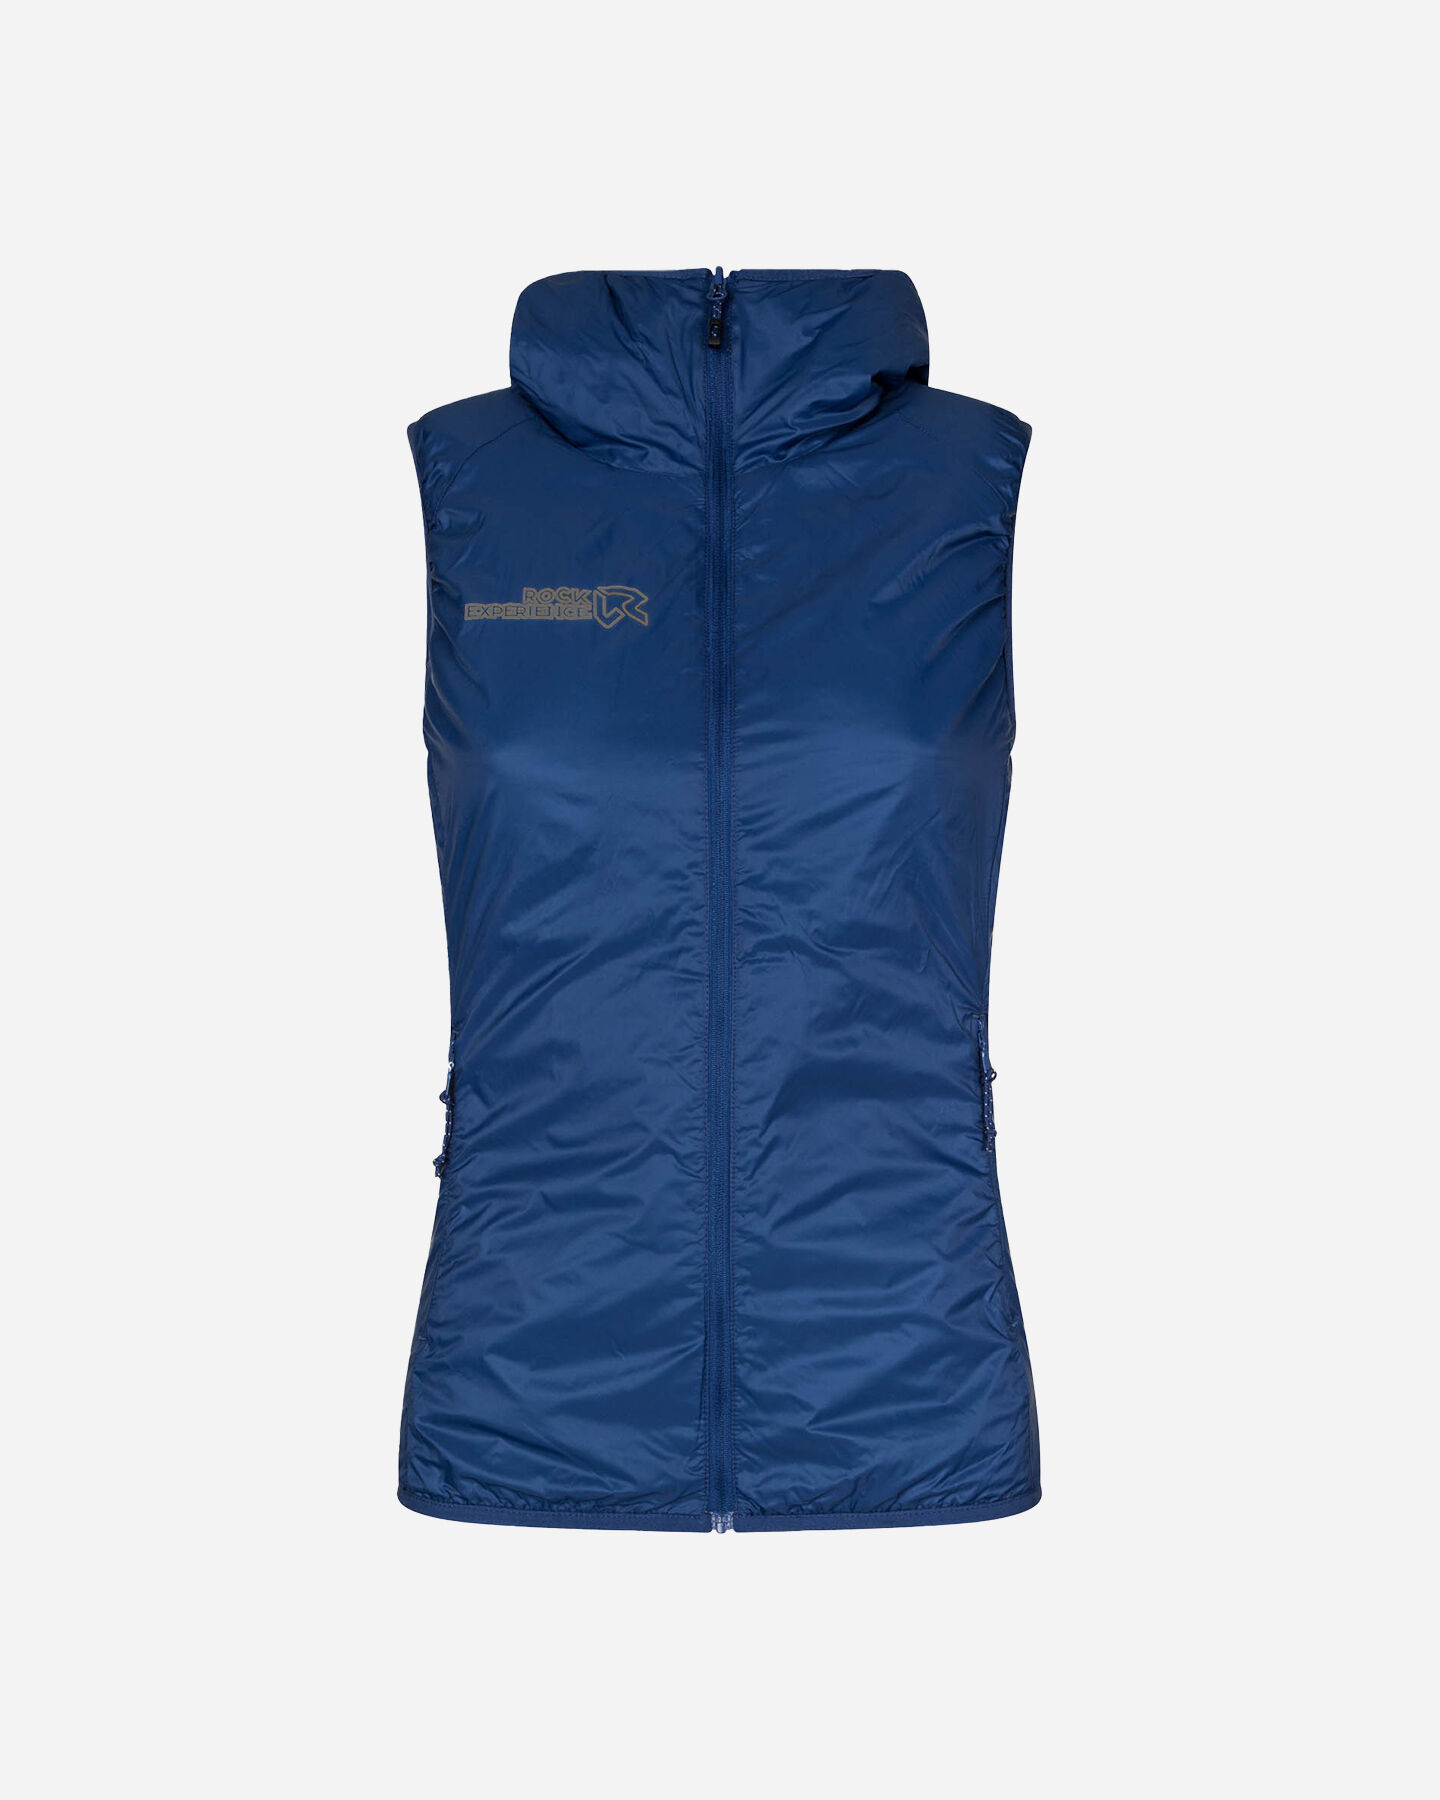  Gilet ROCK EXPERIENCE GOLDEN GATE W S4130502|2265|XS scatto 2